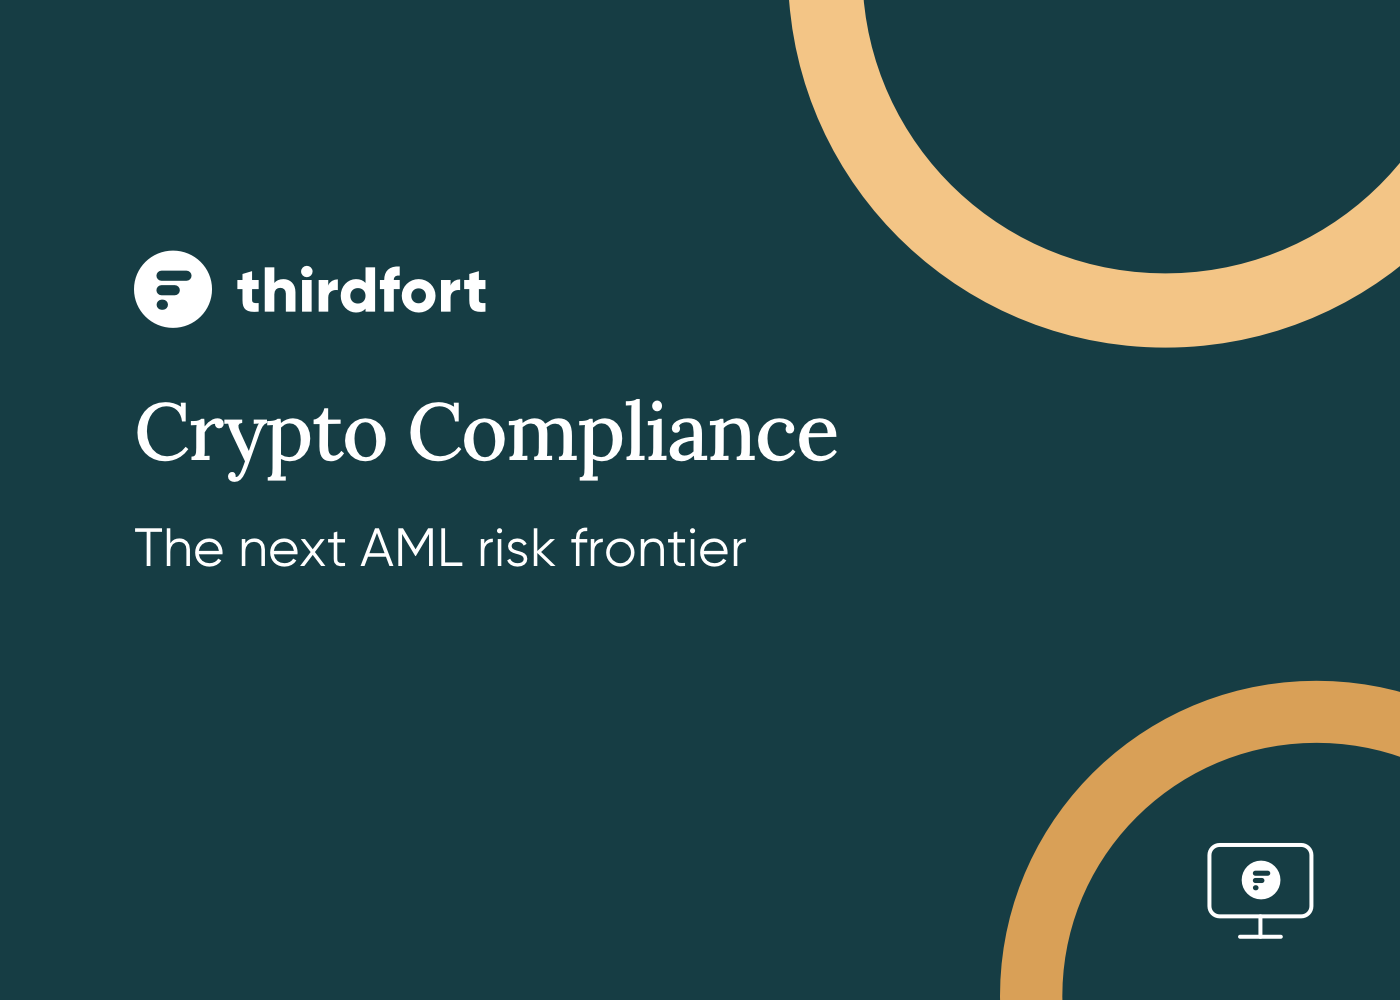 A Thirdfort webinar with title "Crypto Compliance"